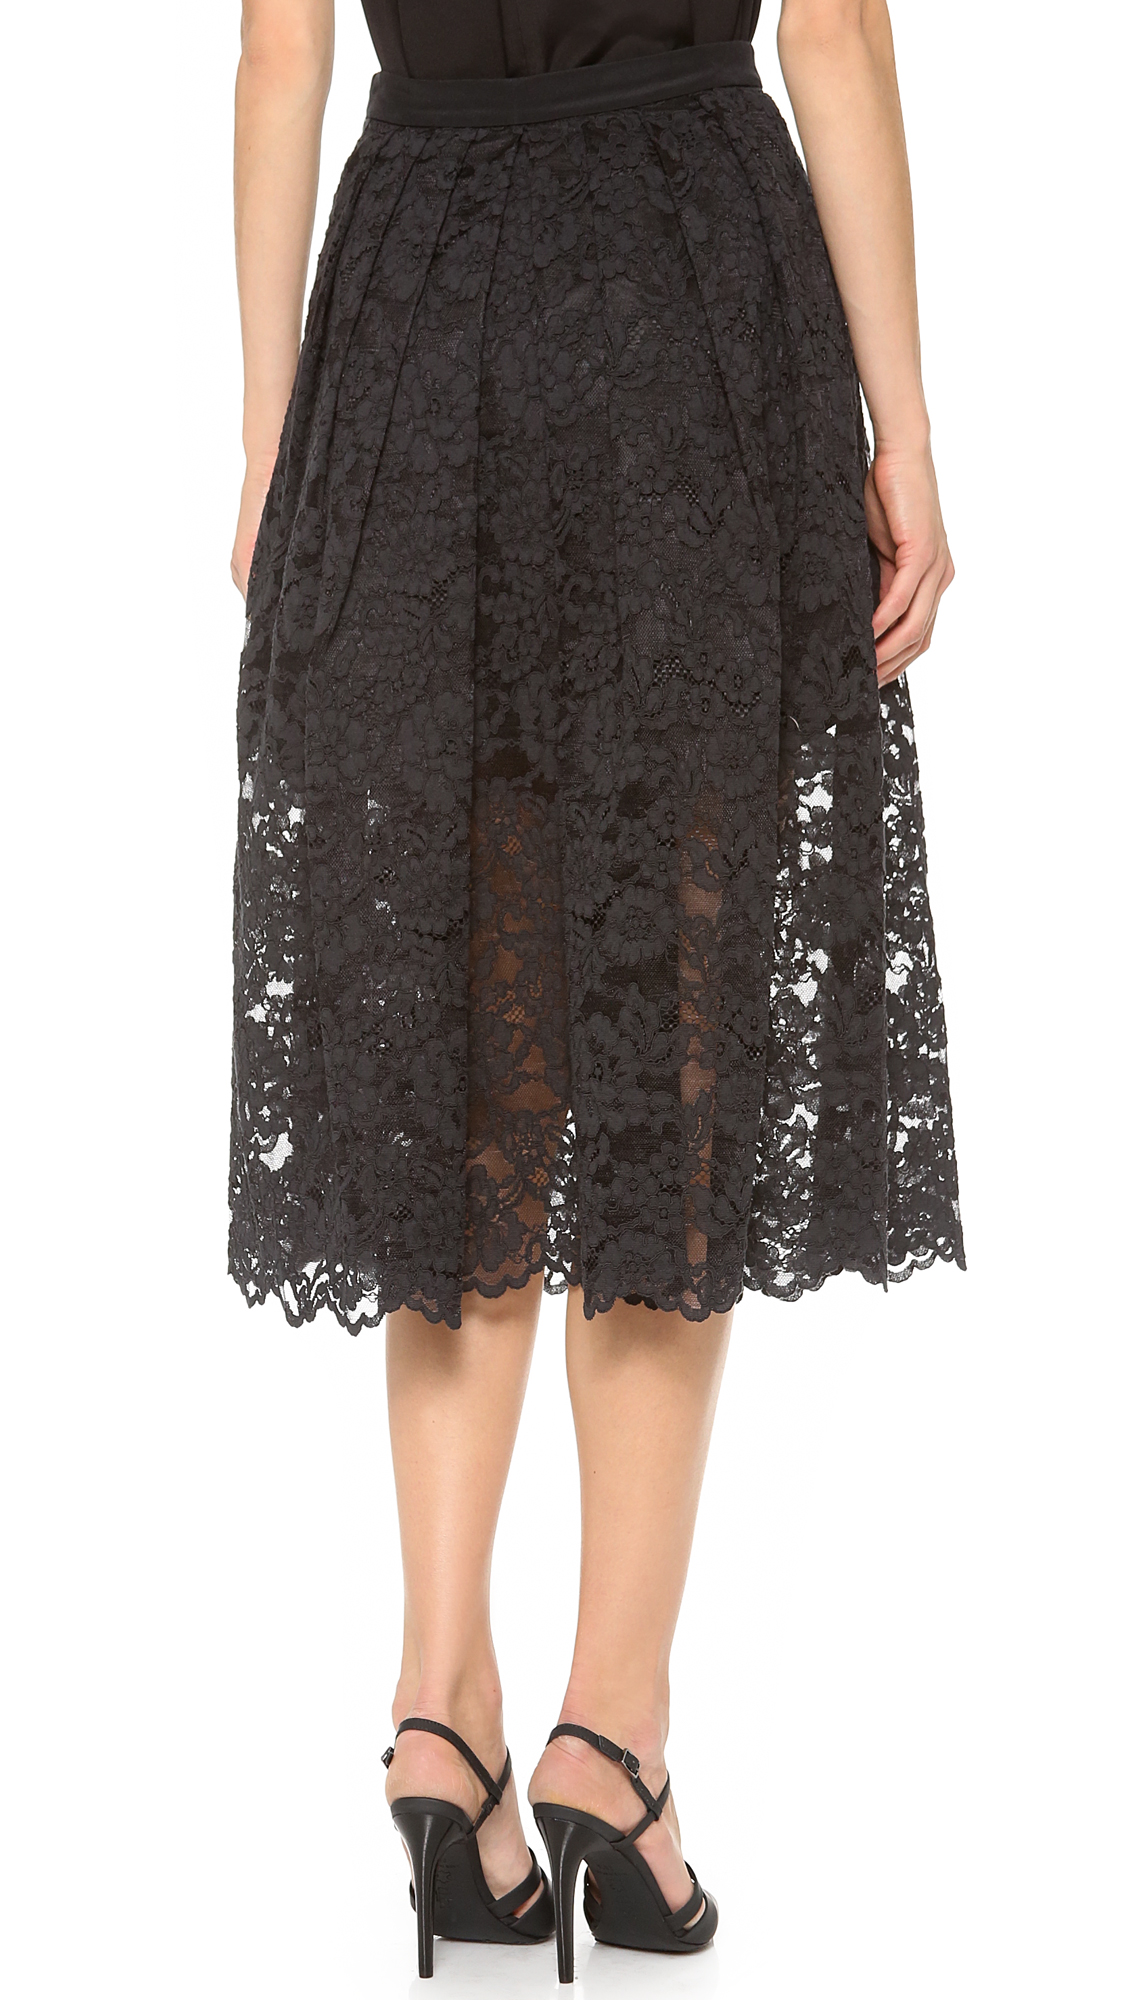 Lyst - Tibi Lace Party Skirt in Black